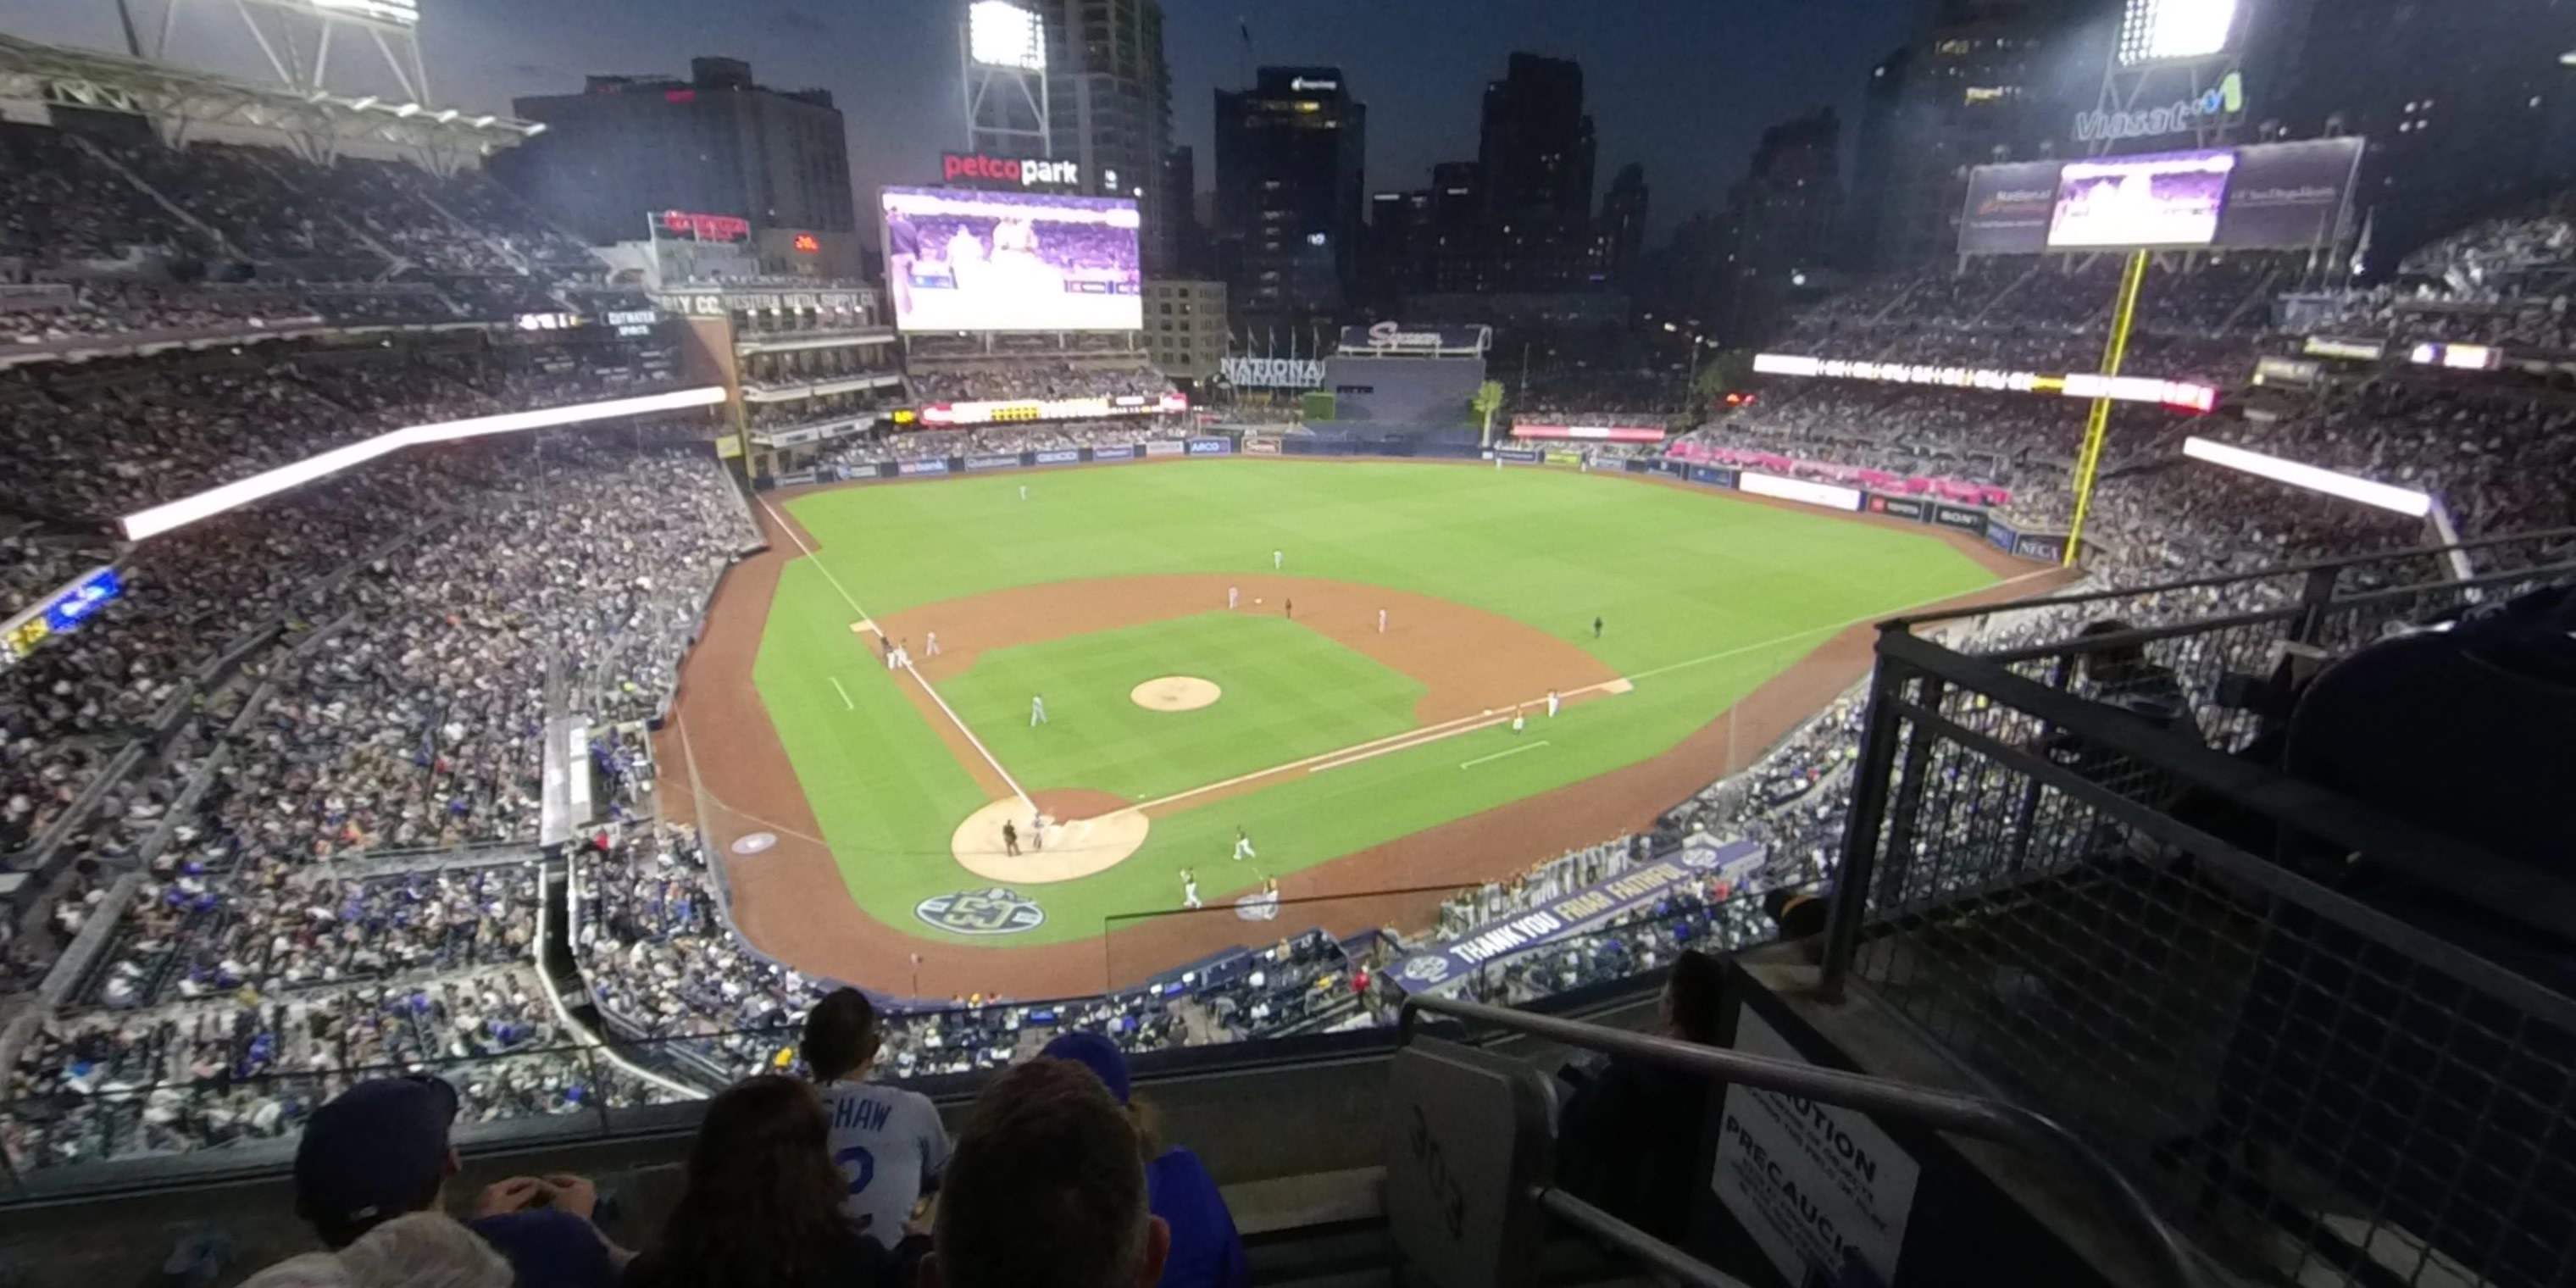 section 303 panoramic seat view  for baseball - petco park